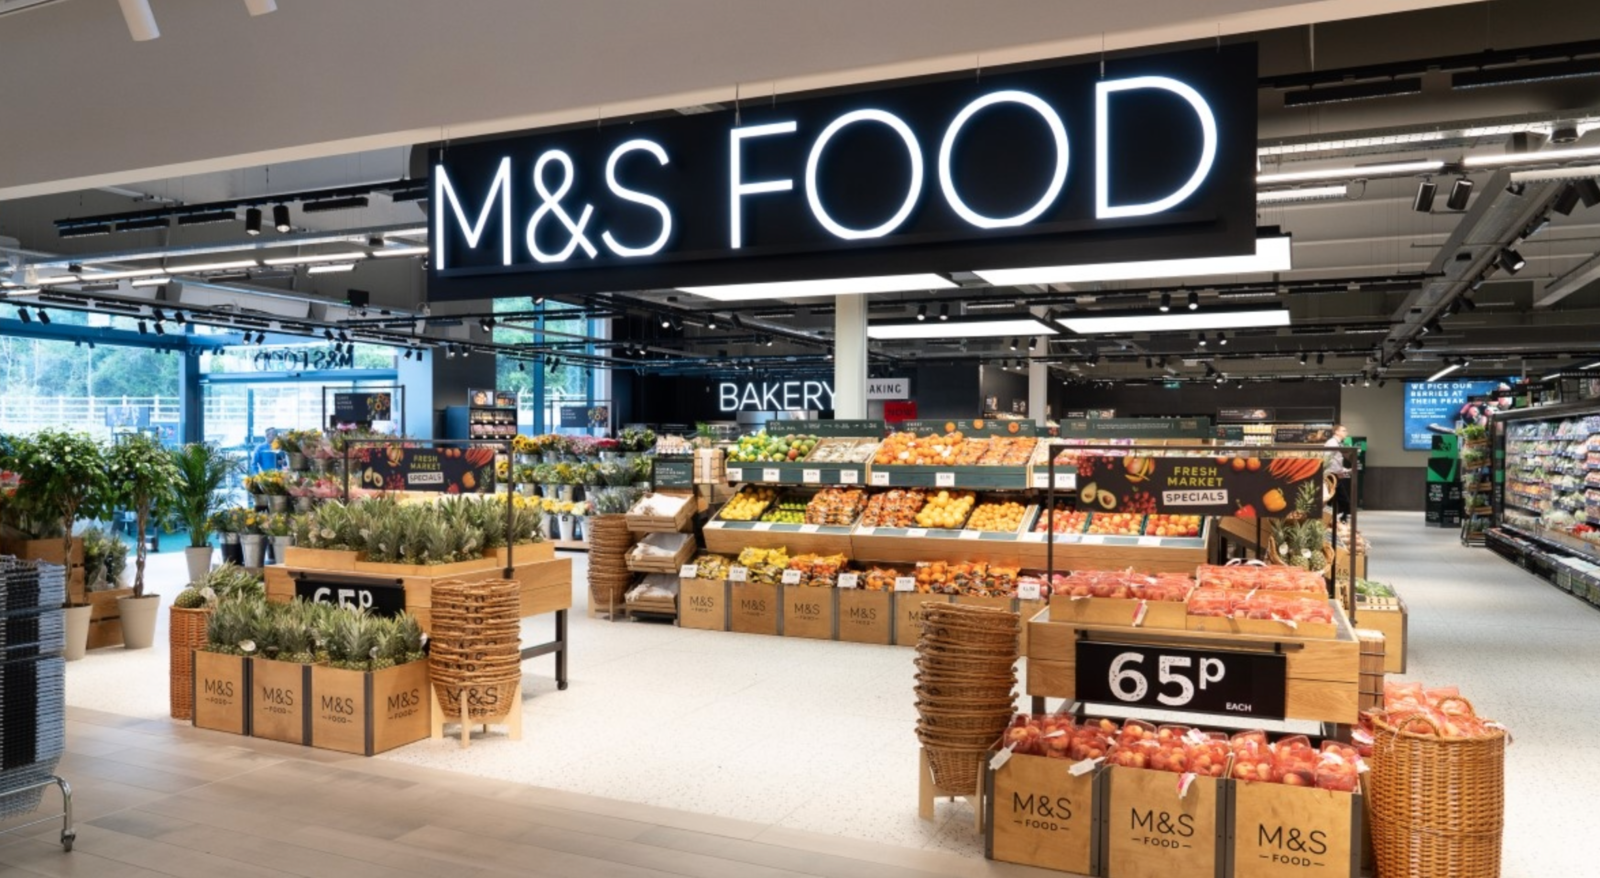 M&S food sign.